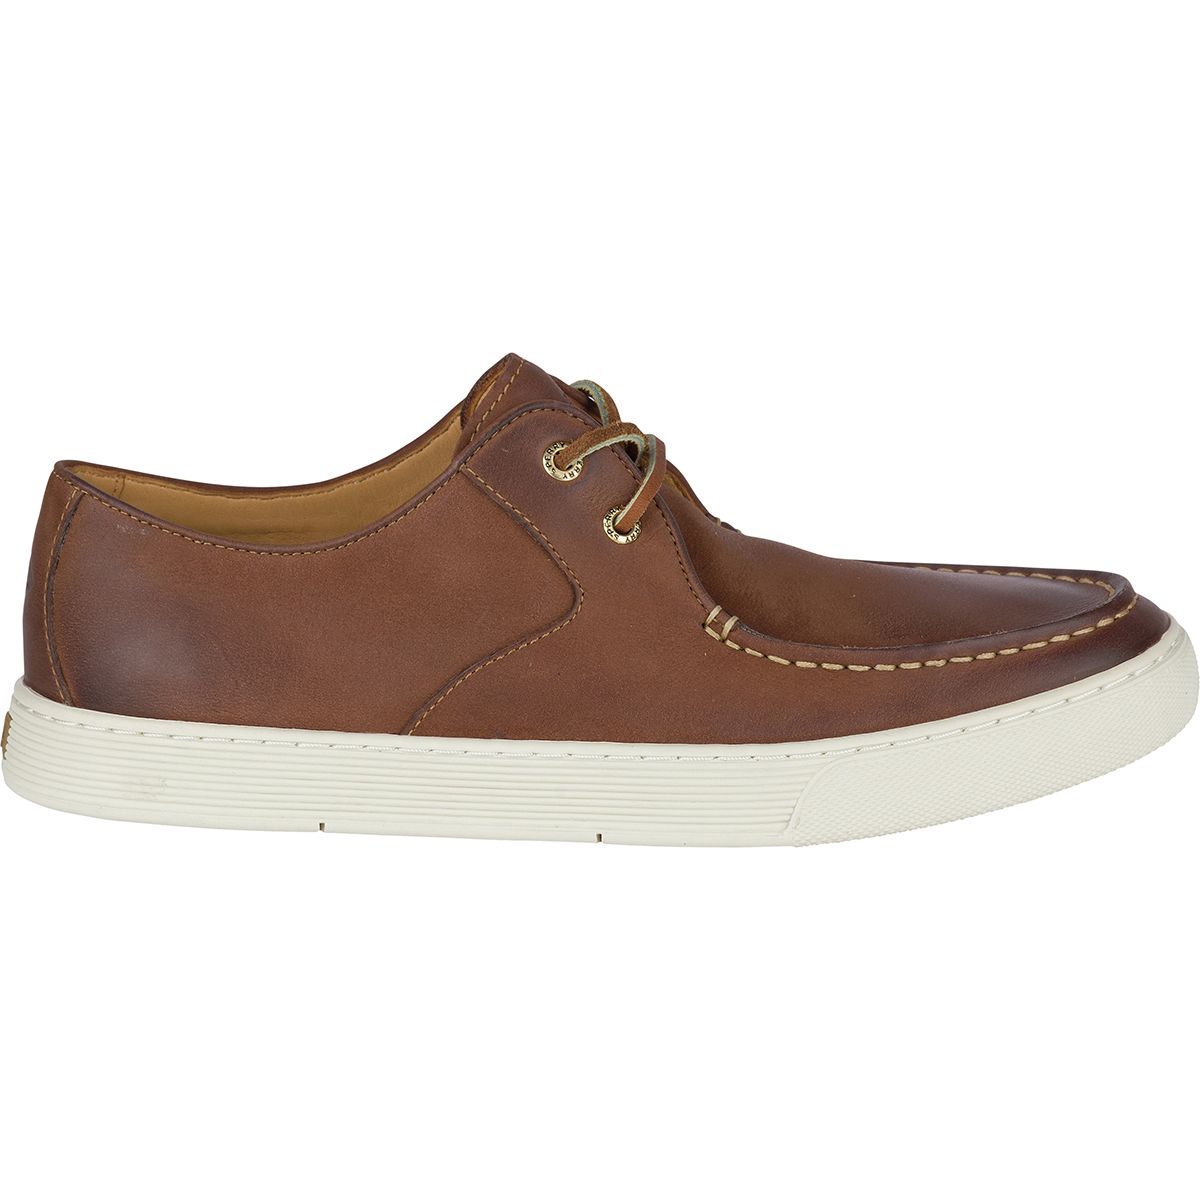 Sperry Top-Sider Gold Sport Captain's Oxford With ASV Shoe - Men's ...